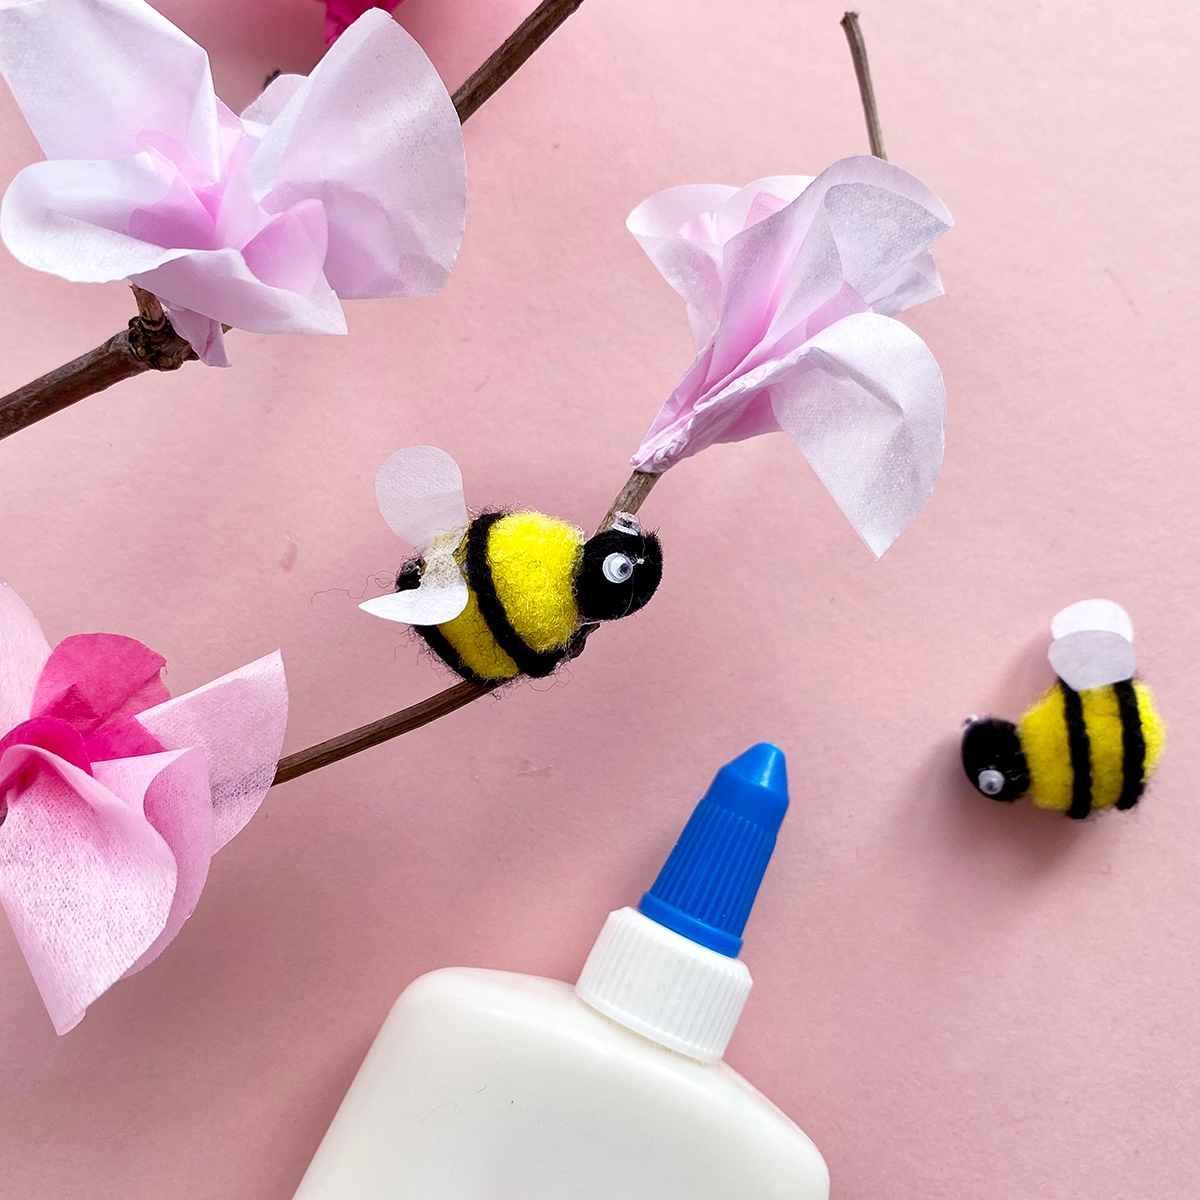 Photo of pom pom bee being stuck onto twig alongside tissue paper cherry blossoms with glue